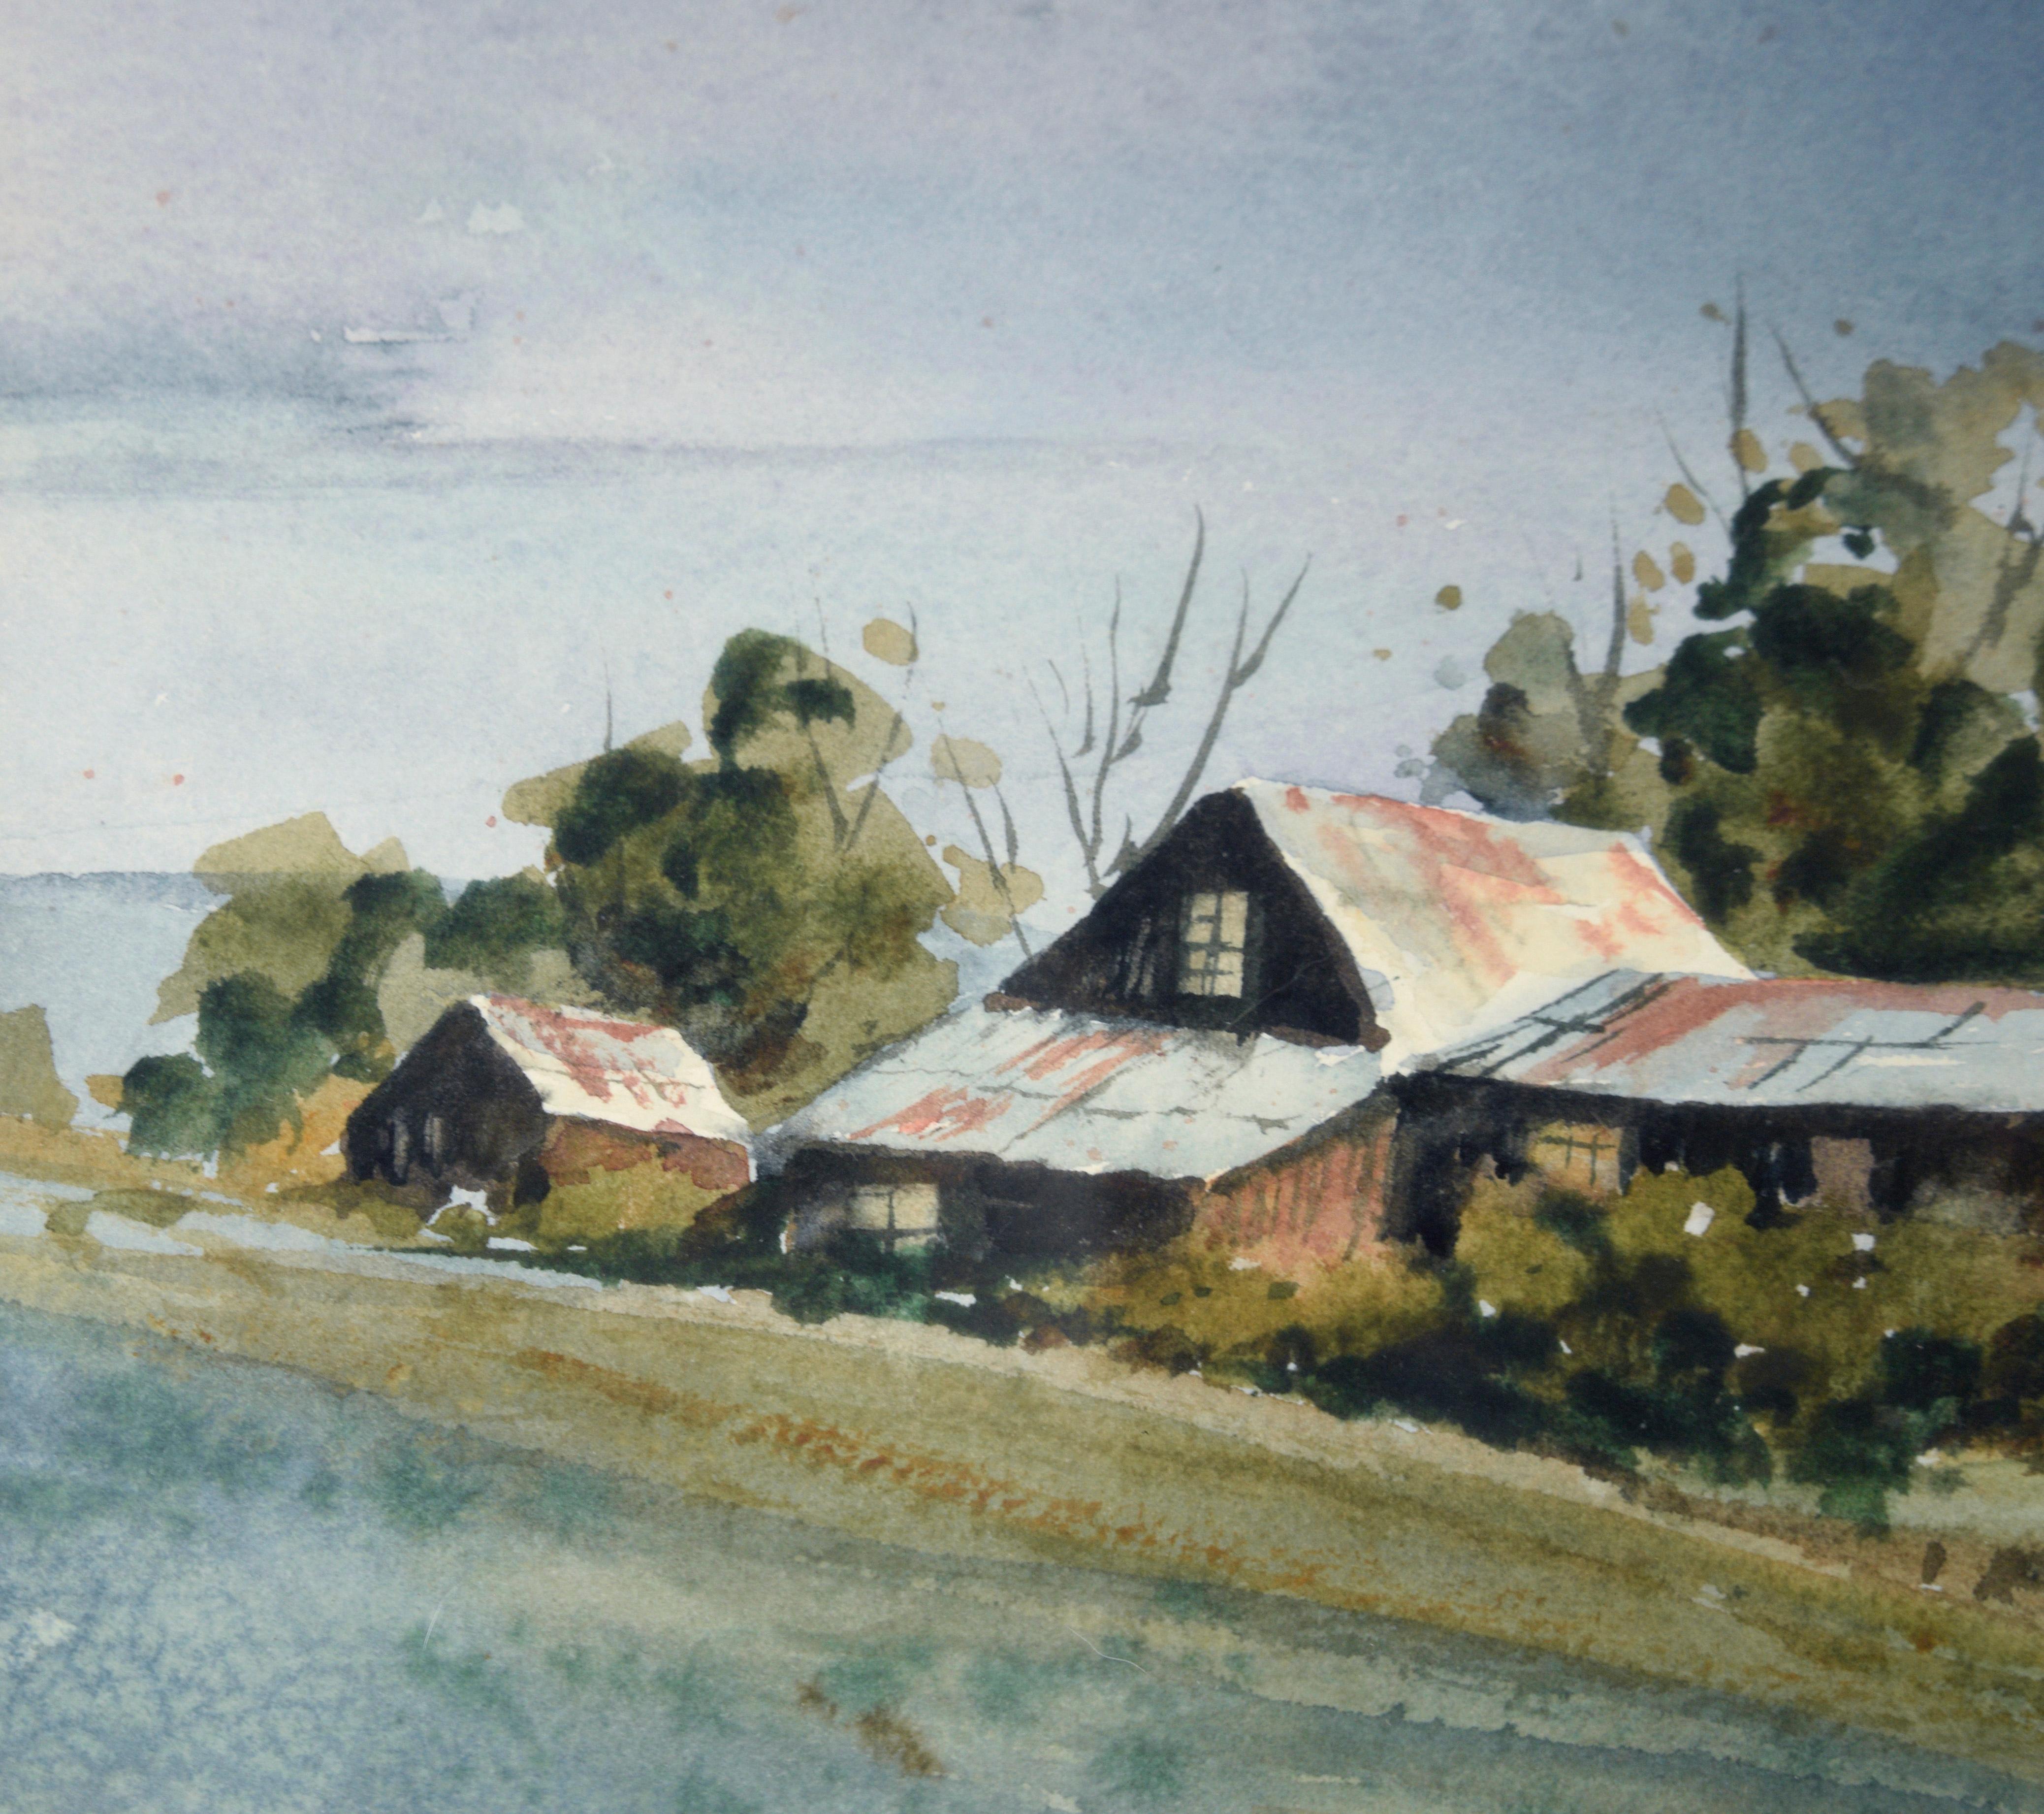 Farmhouse Amador Foothills - Rural California Landscape in Watercolor on Paper - American Impressionist Art by Alice Duke